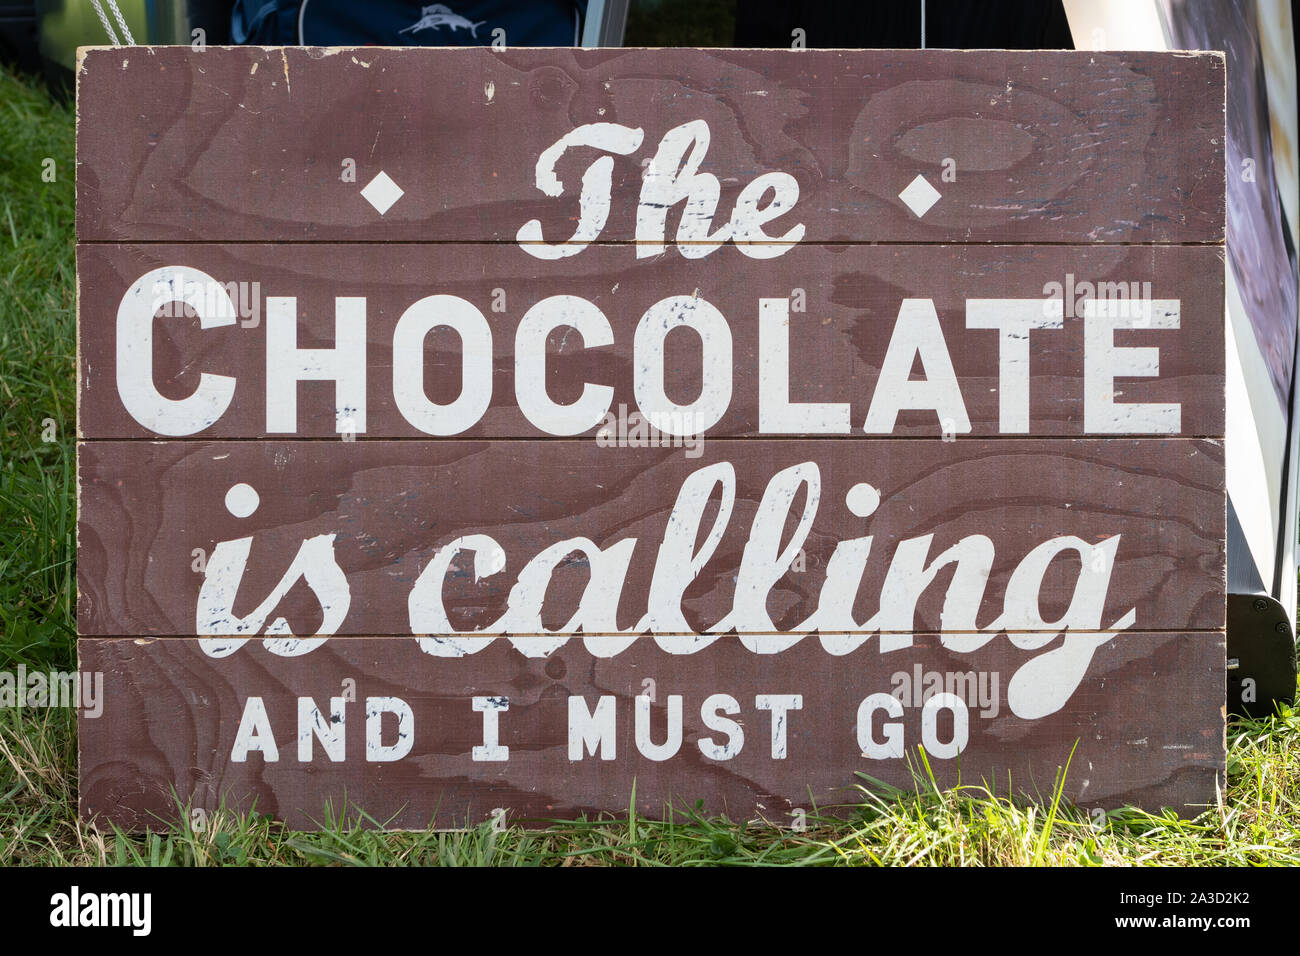 The Chocolate is calling and I must go - amusing sign Stock Photo